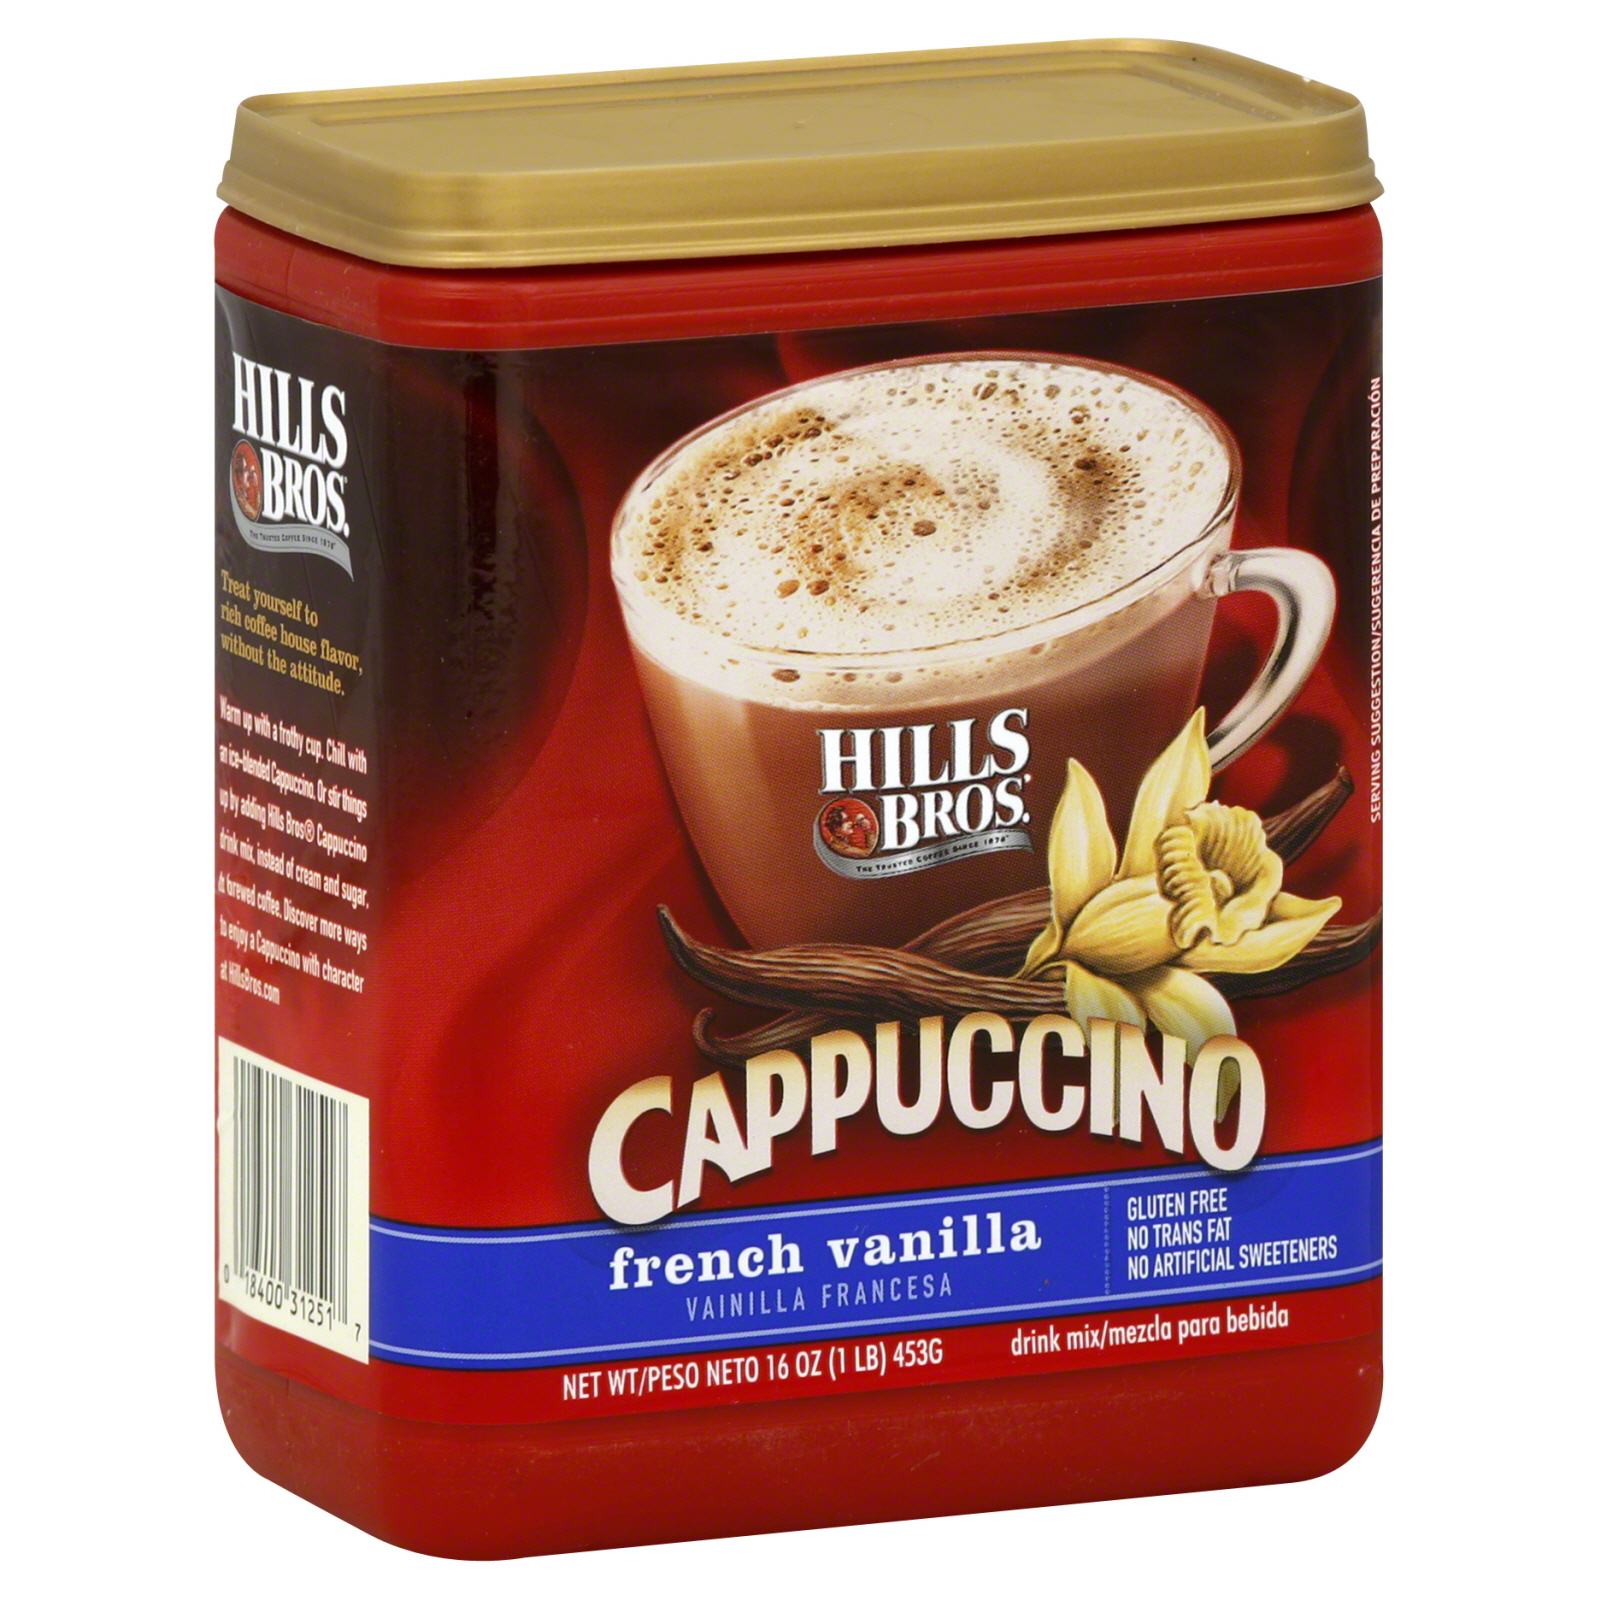 Hills Bros.  French Vanilla Cappuccino Cafe Style Drink Mix 16oz. Canister